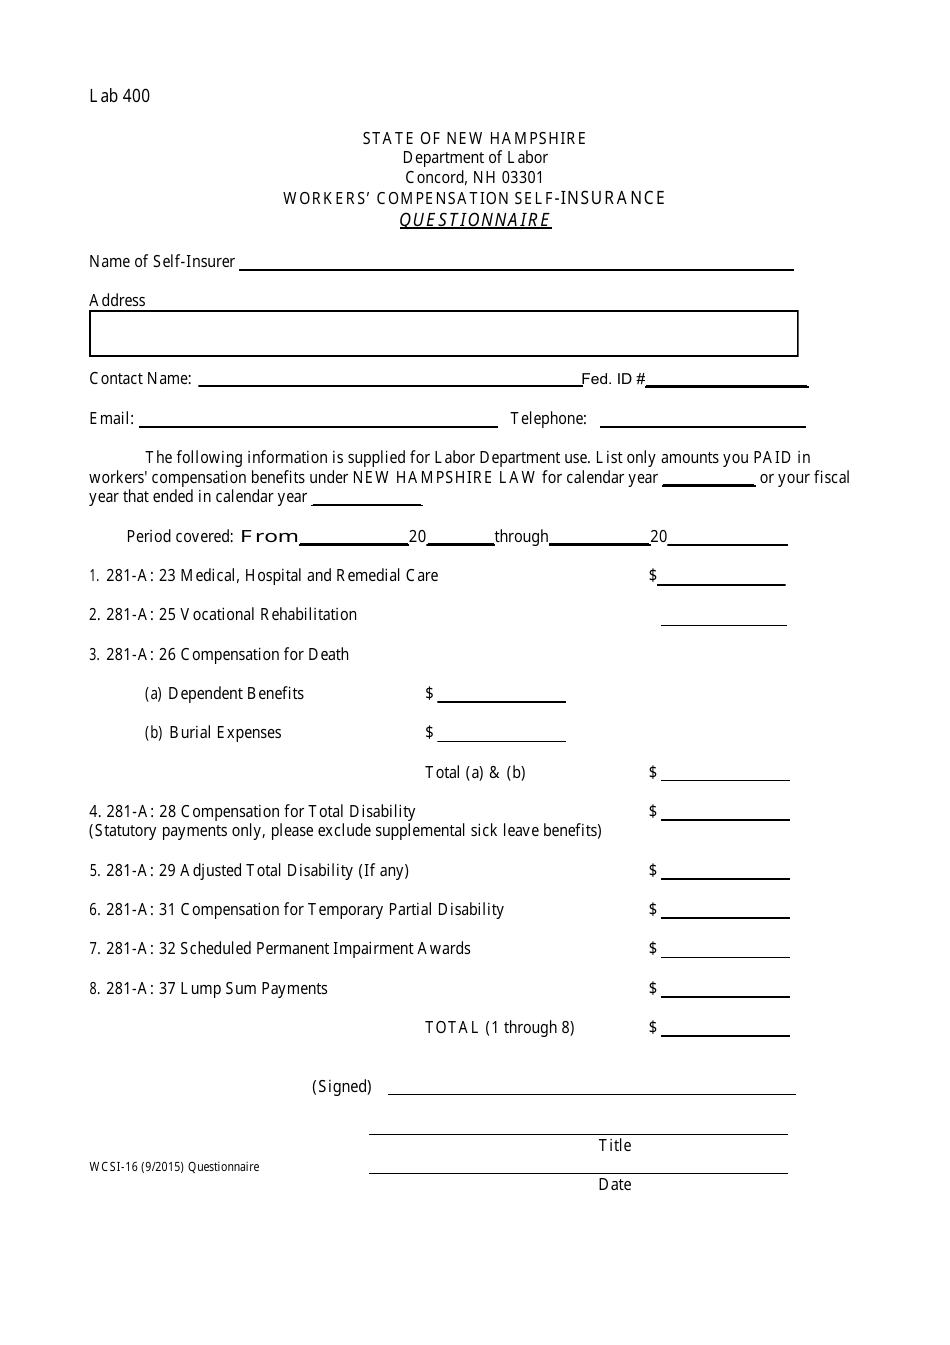 Form WCSI-16 Self Insurance Questionnaire - New Hampshire, Page 1